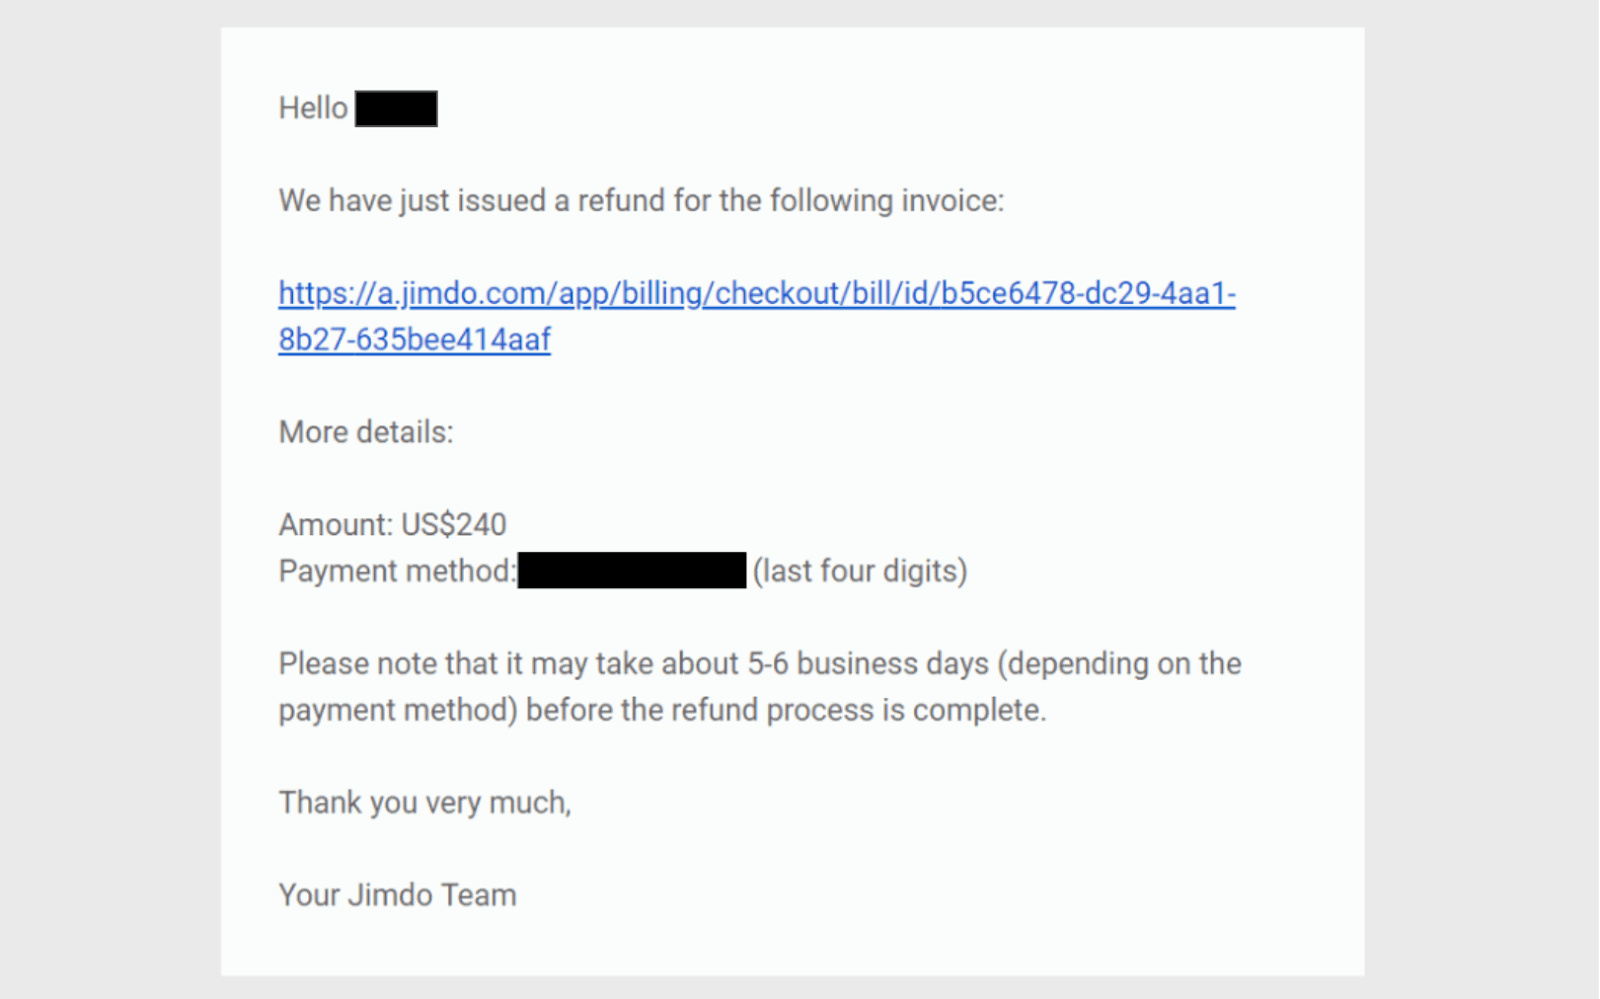 How to Cancel Your Account with Jimdo and Get a Refund